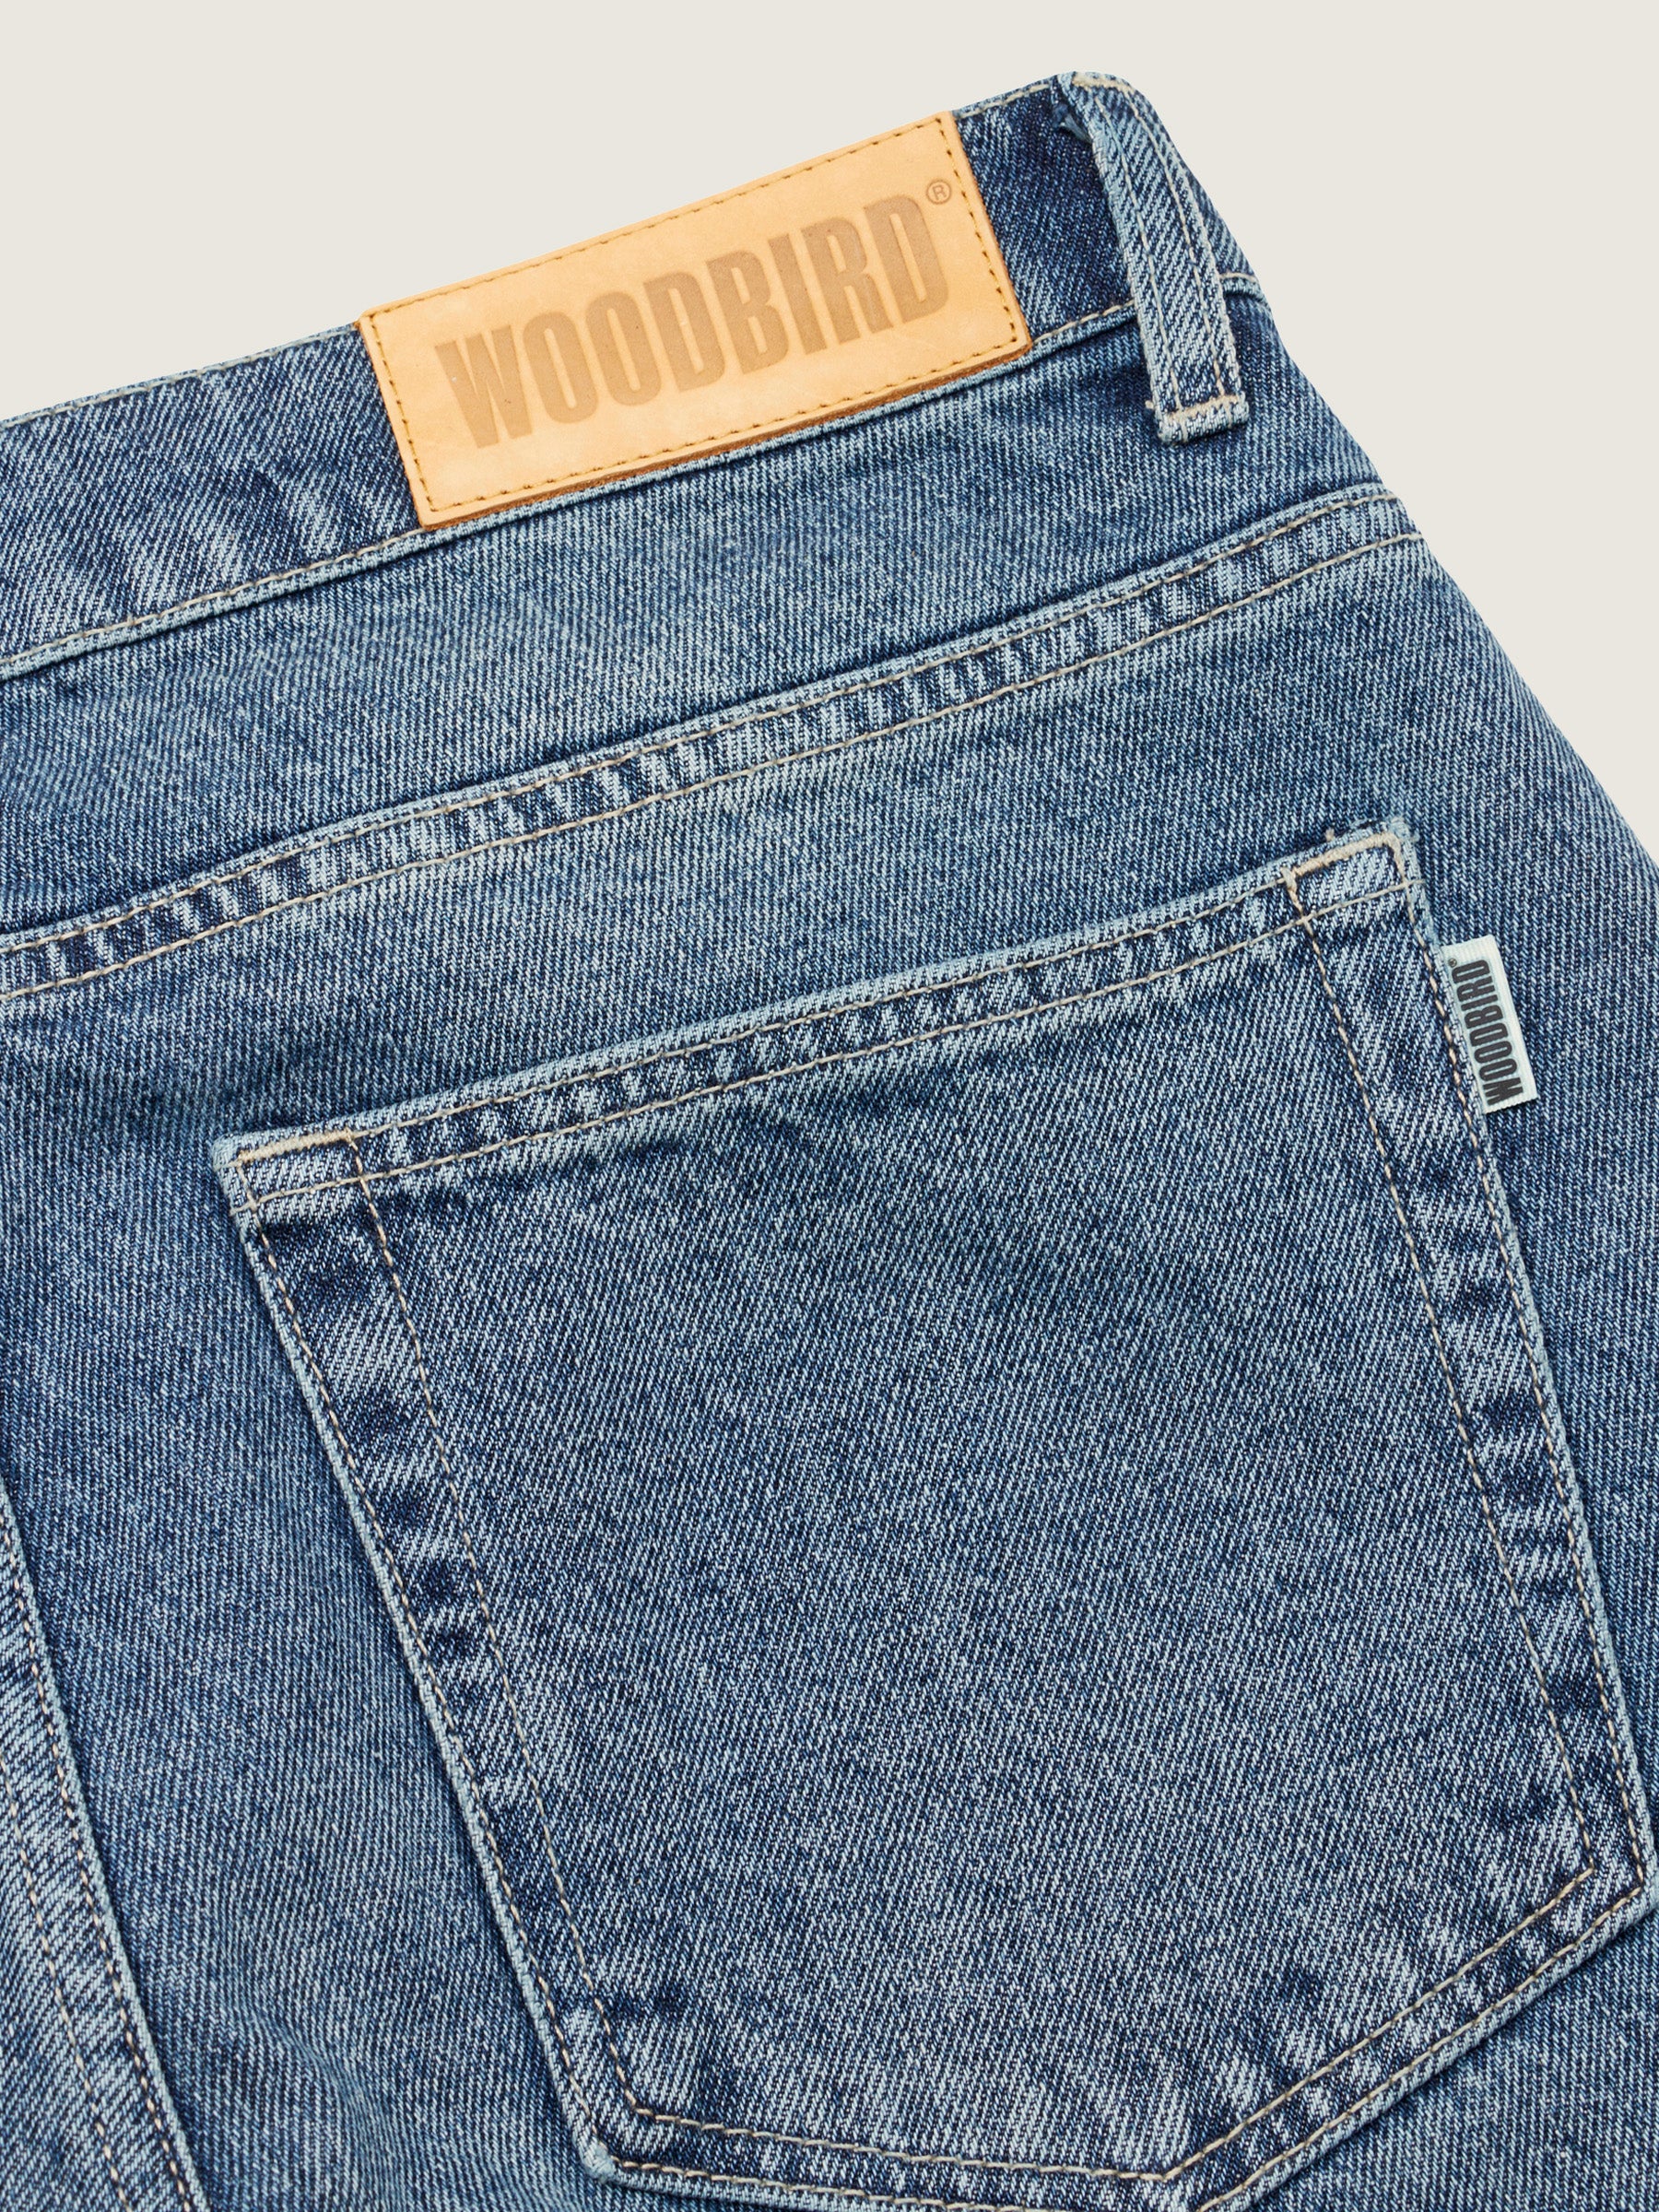 Woodbird WBDoc Deep90s Jeans Jeans Washed Blue